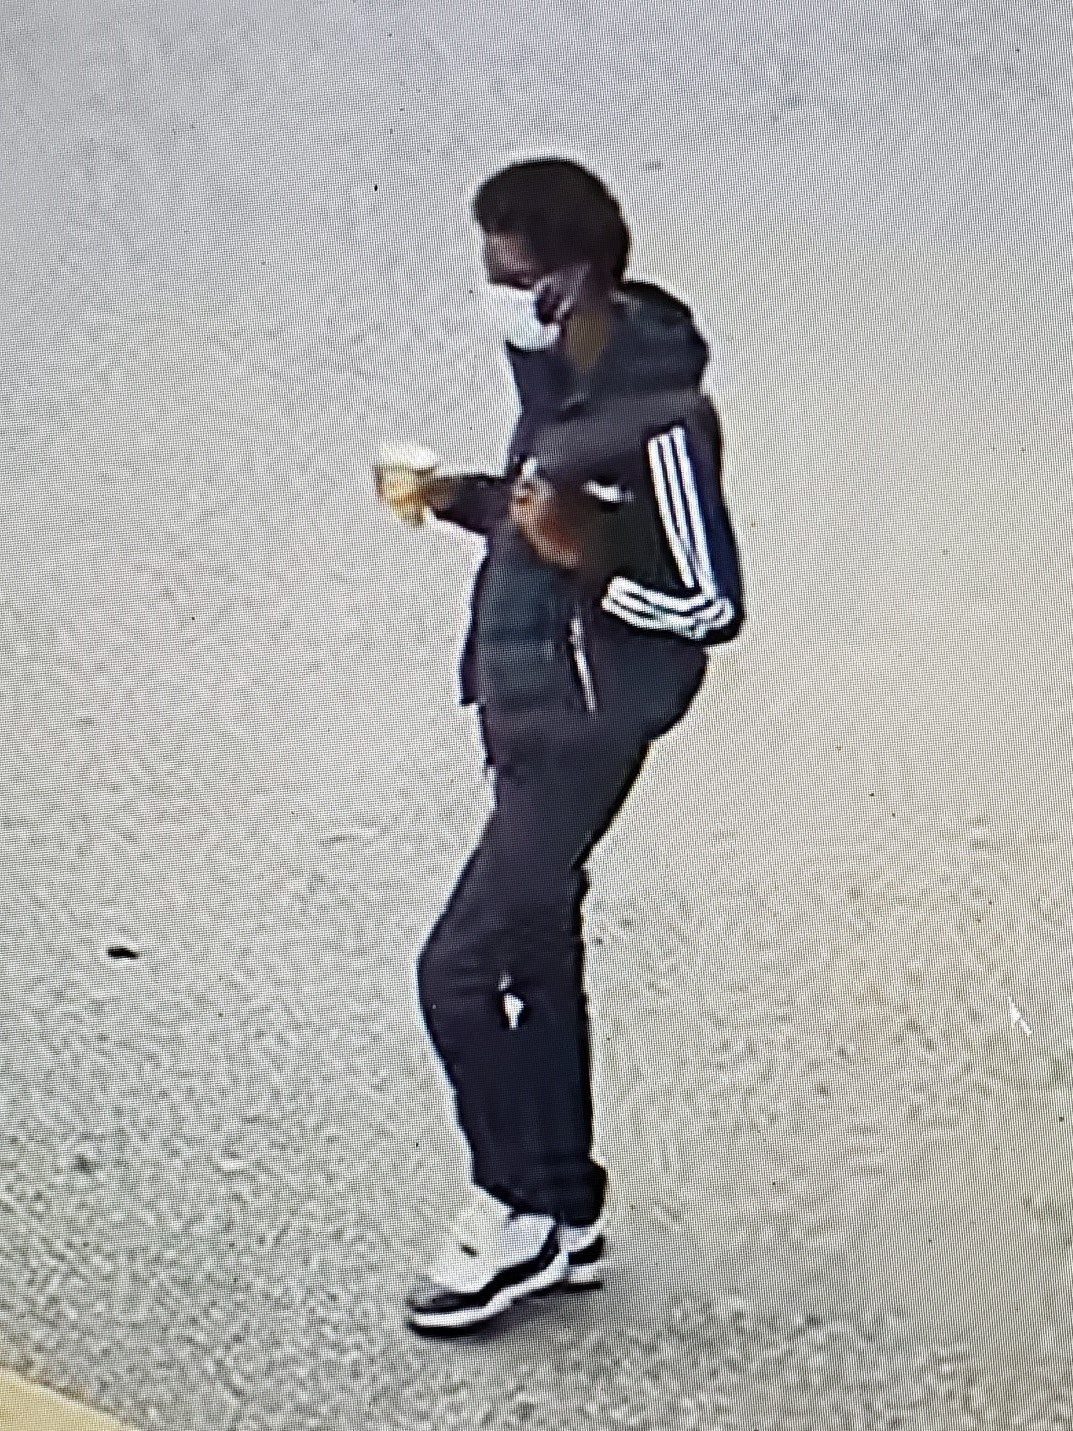 Police say this picture, released by investigators in late April, is of Osman Afandy, 23, of the GTA. Afandy was charged this week with first-degree murder in the case.